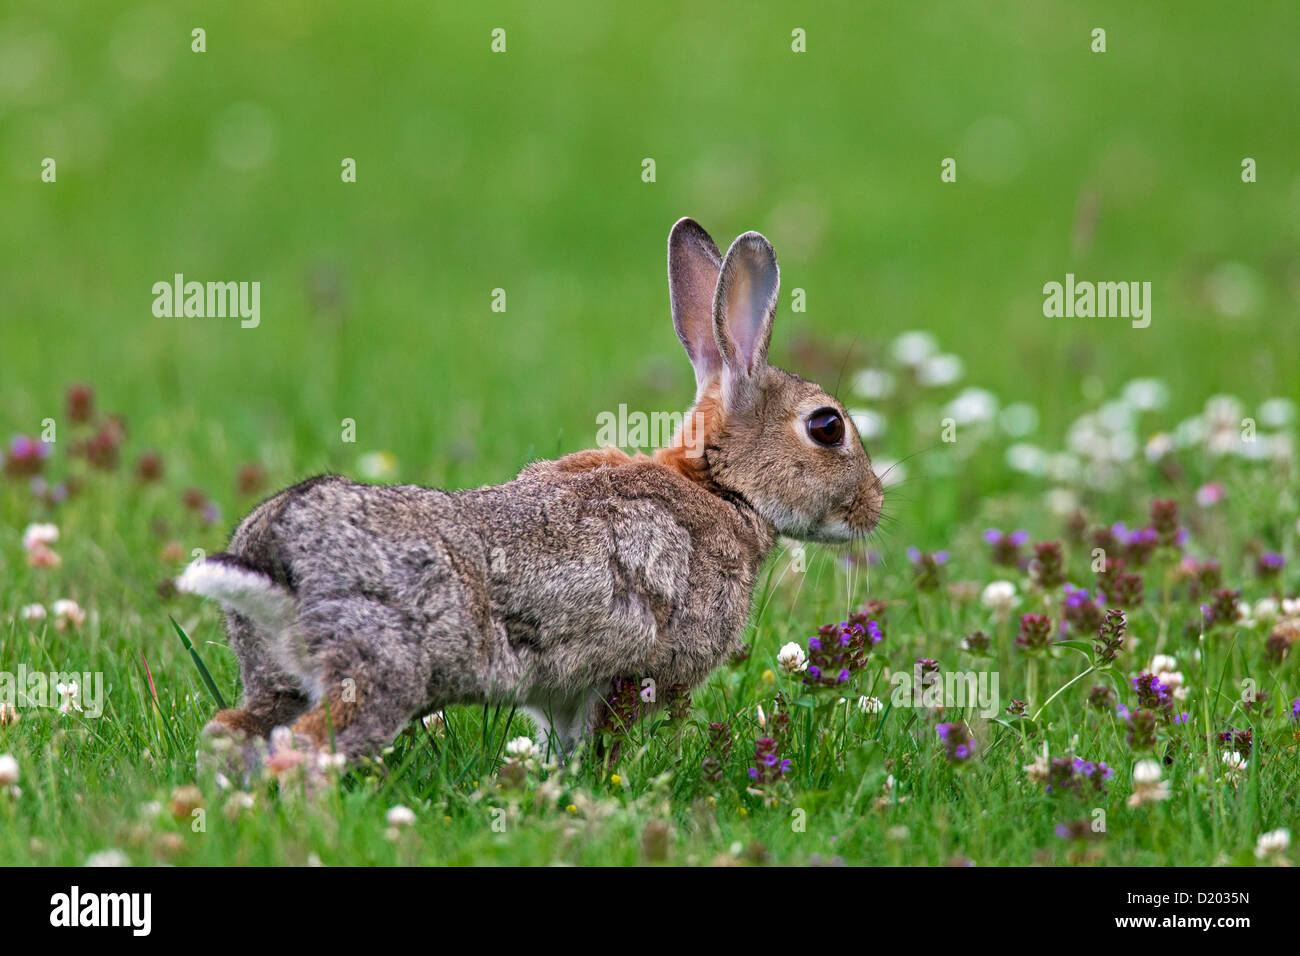 European rabbit / common rabbit (Oryctolagus cuniculus) stretching limbs in field with wildflowers Stock Photo